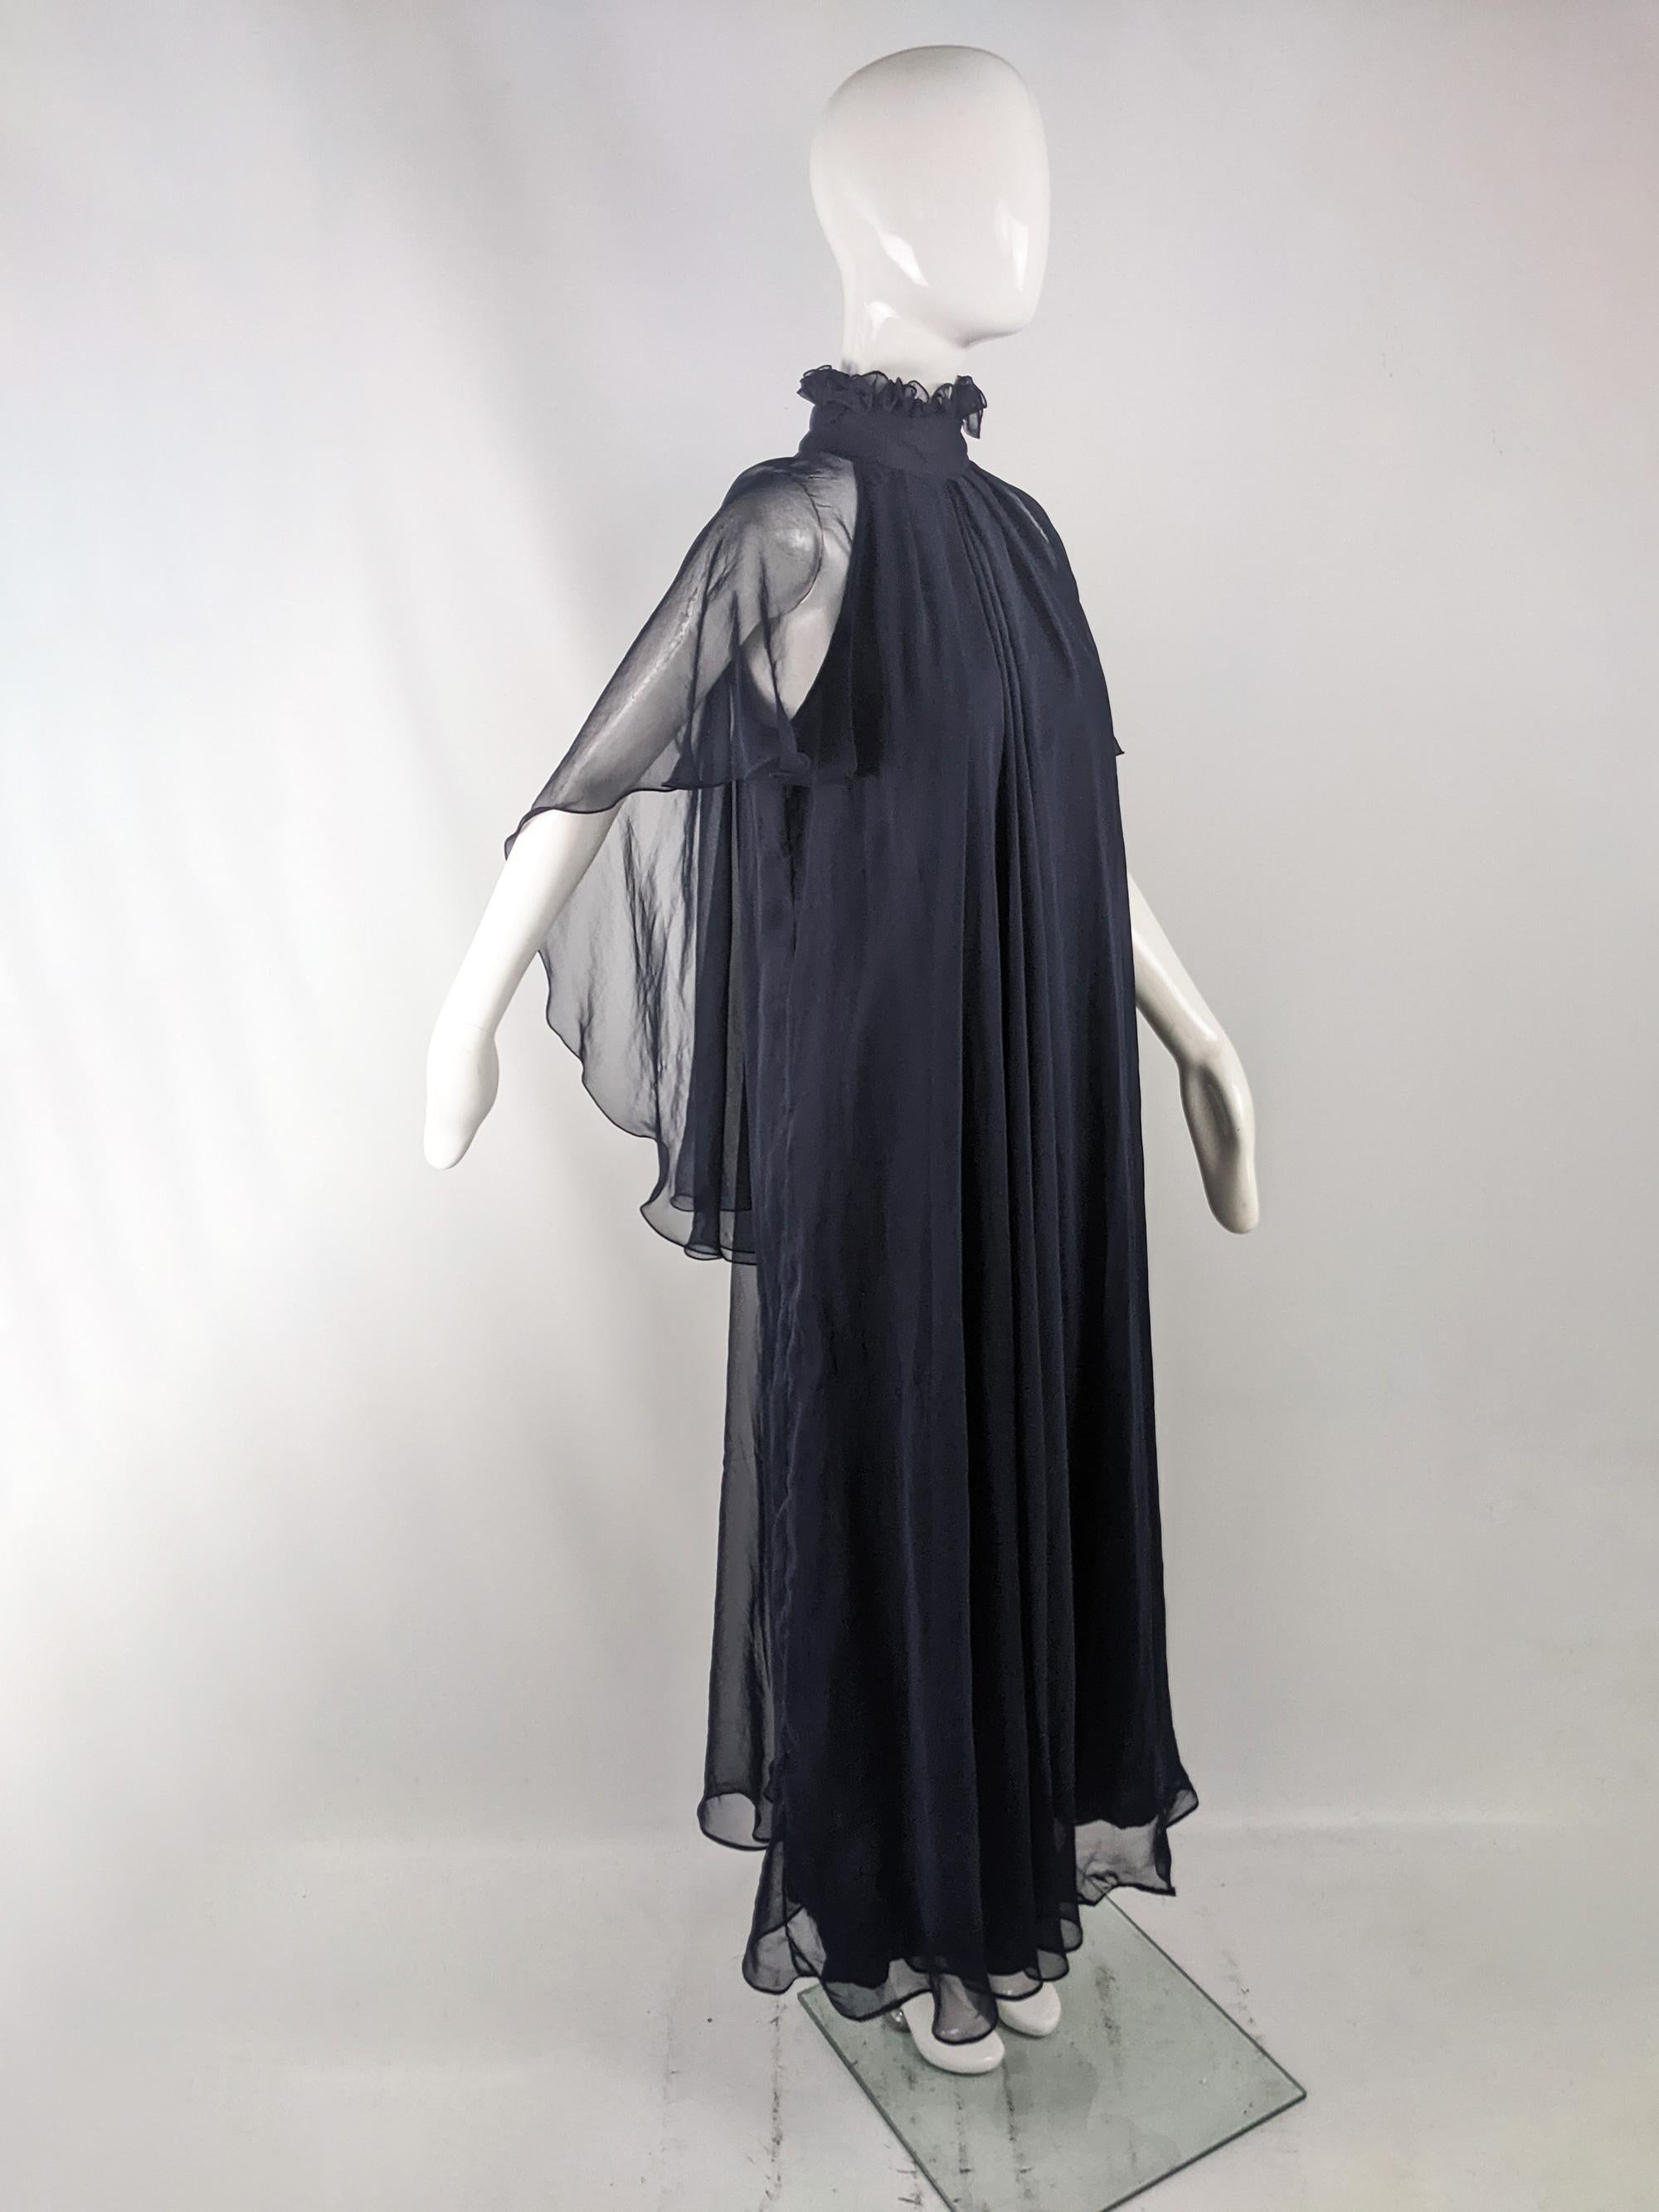 Black Jean Varon Vintage 1970s Navy Blue Chiffon Dress Cape Sleeves Evening Gown For Sale